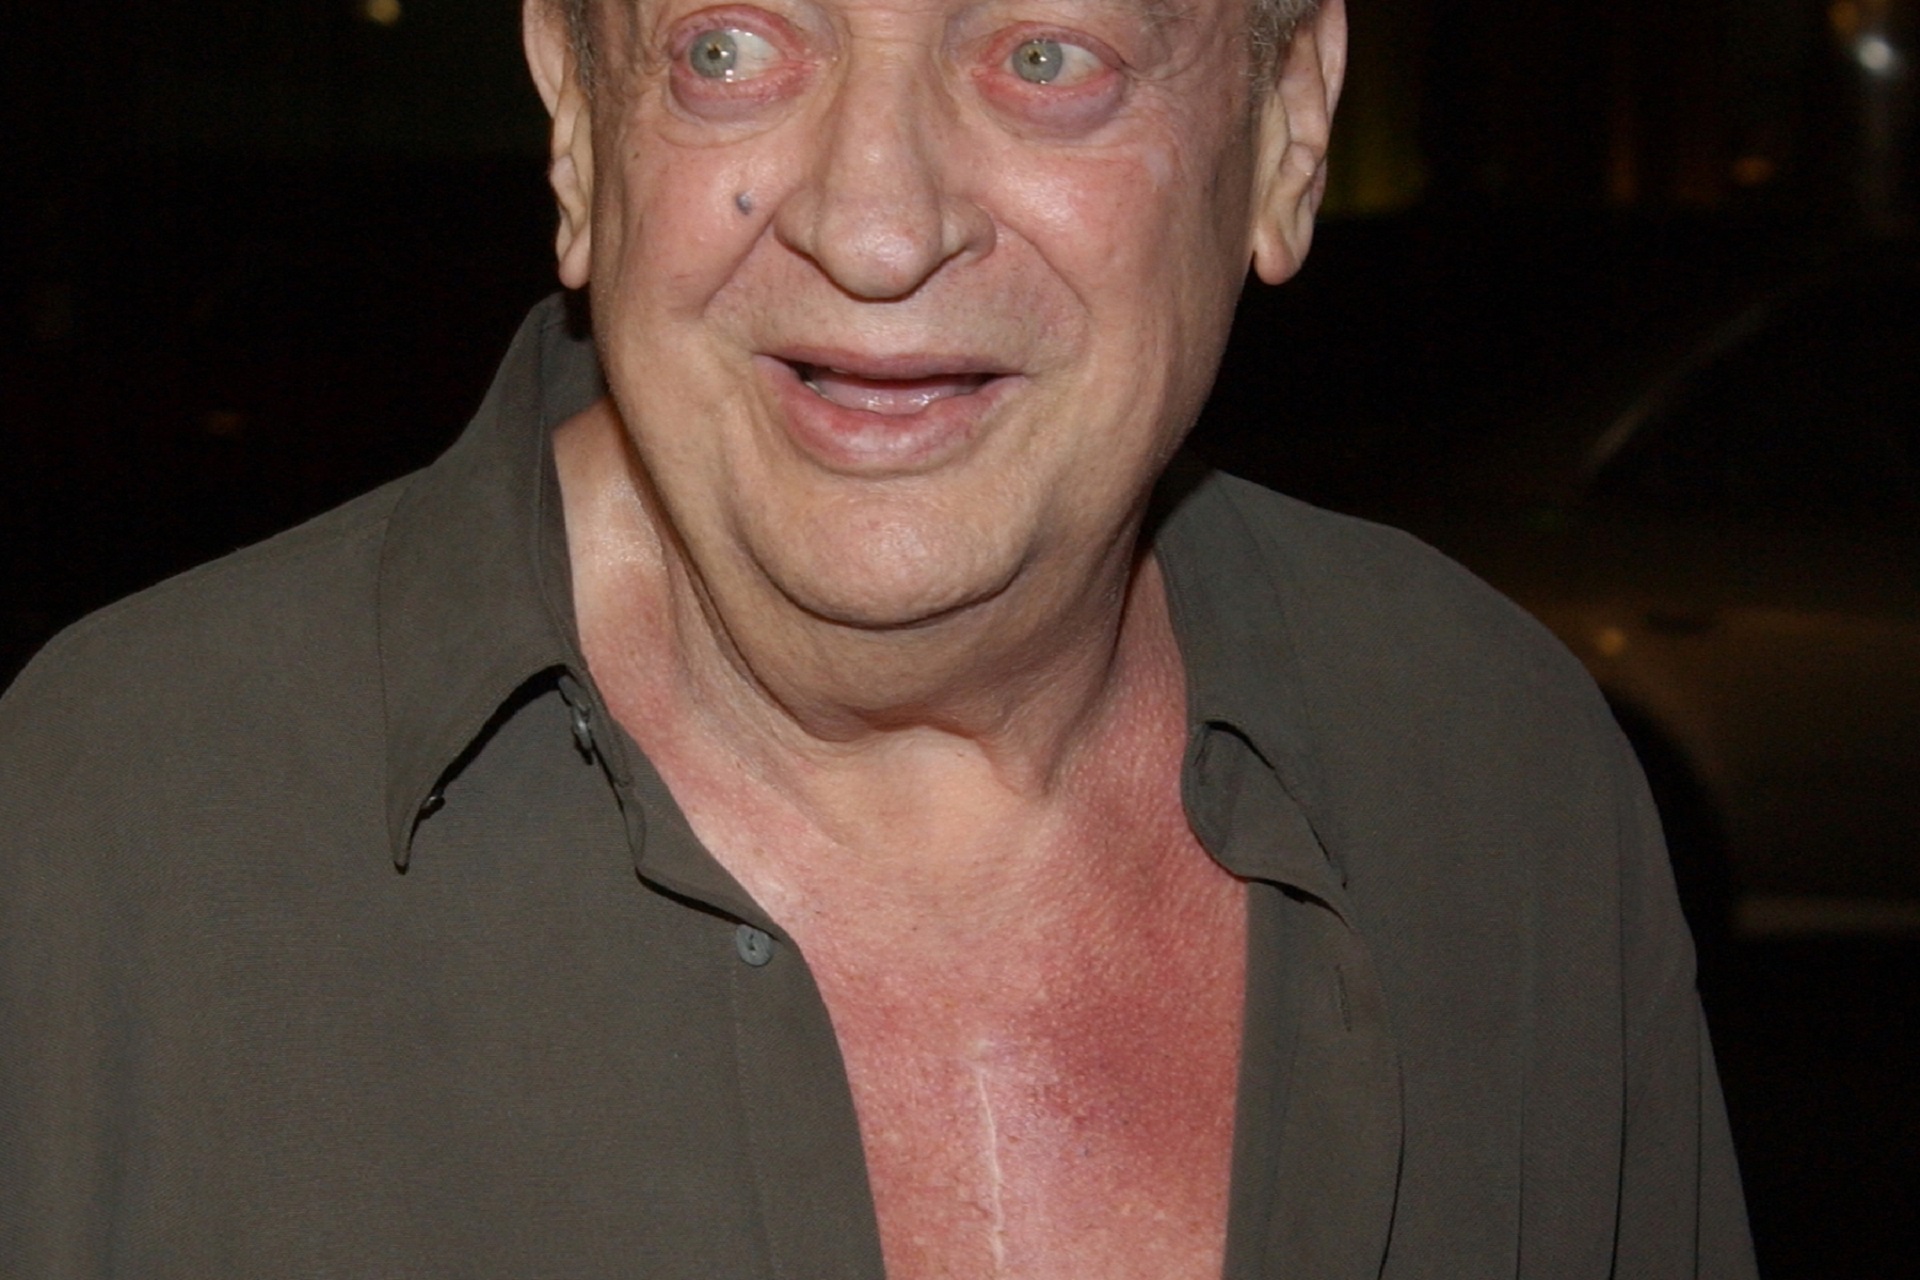 What Is Meant When Rodney Dangerfield Said ‘No Respect’?